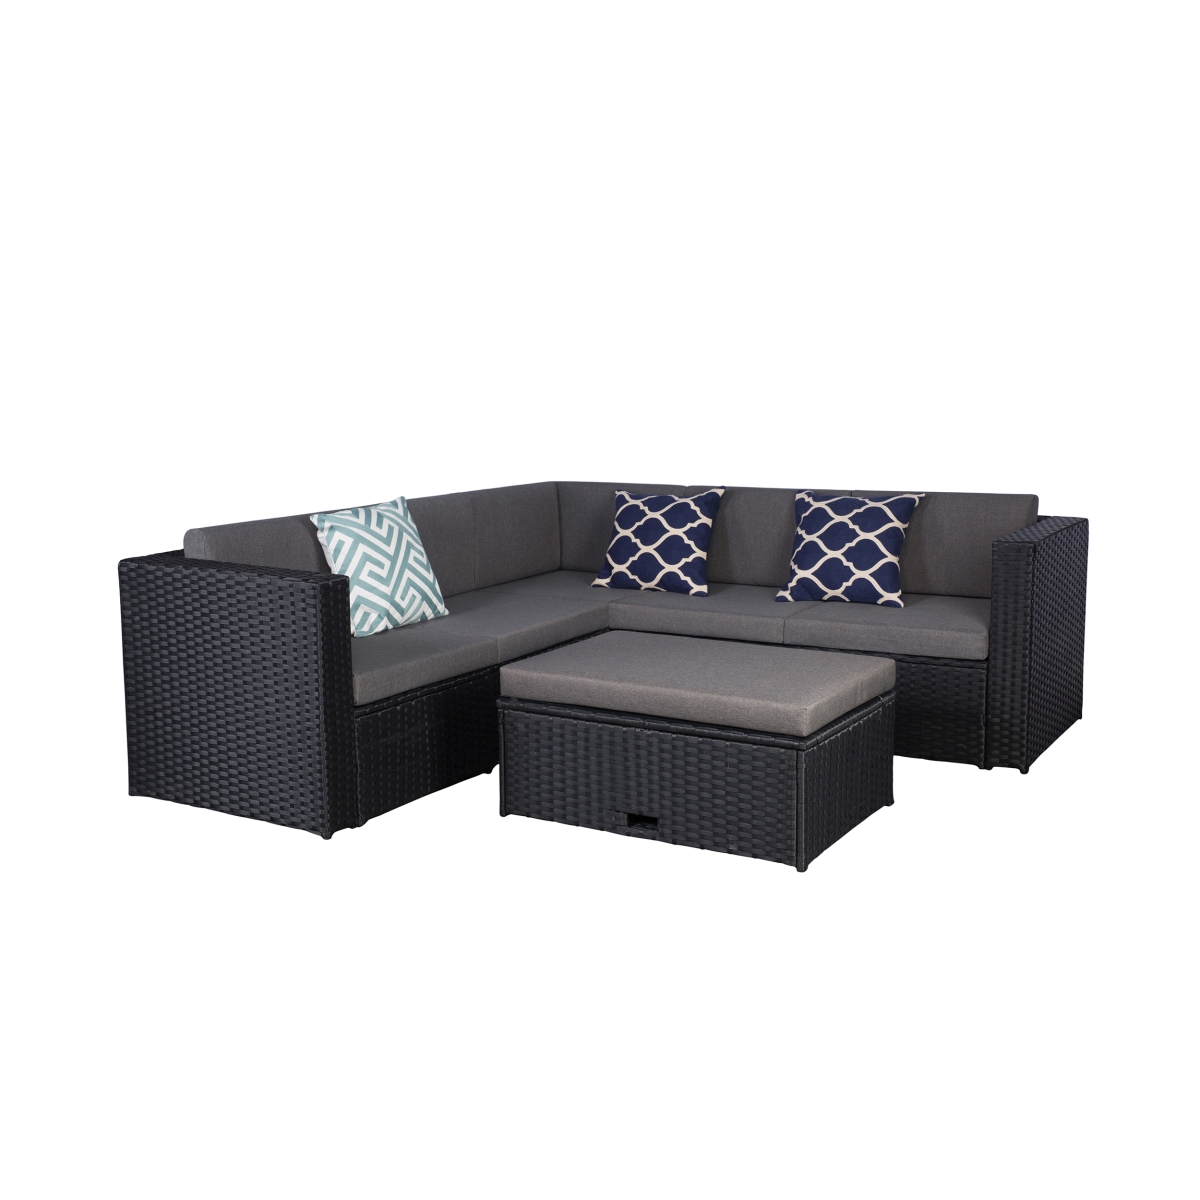 P152-01 6 Seating Modern Sectional Set With Storage Ottoman, Black & Gray - 4 Piece